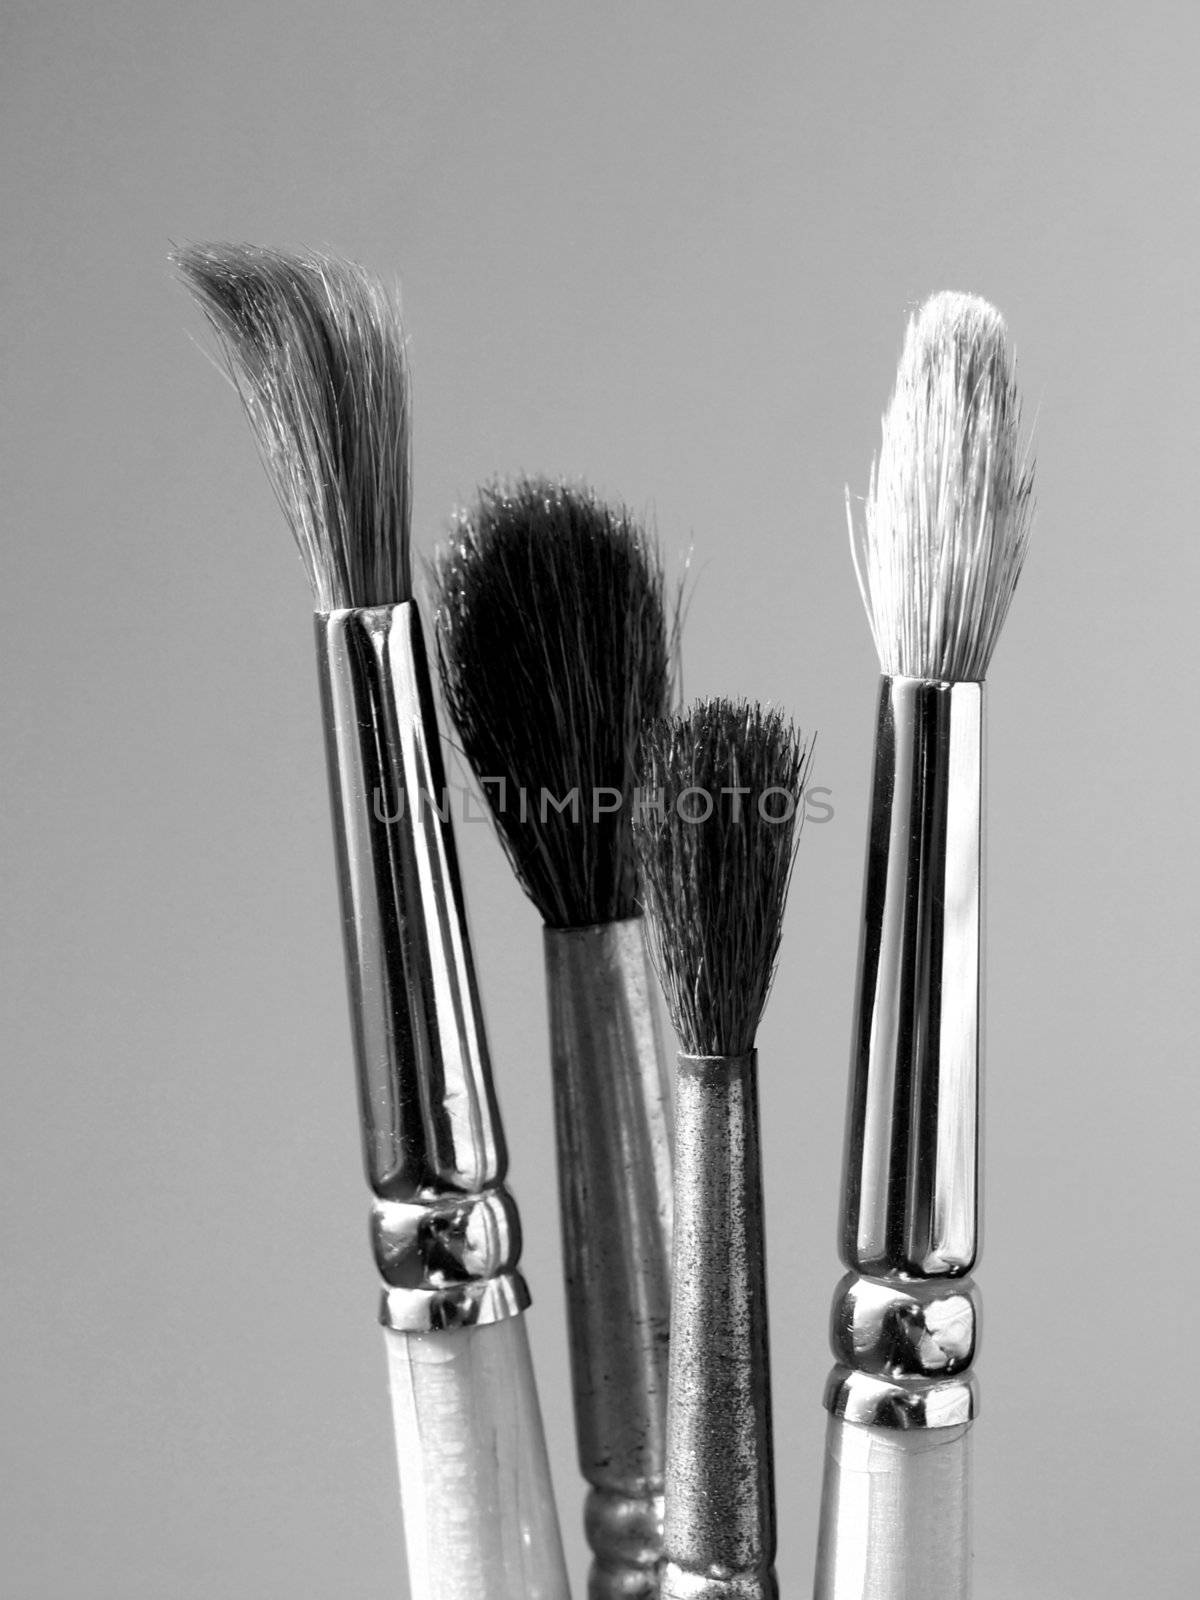 Paintbrushes tools for oil or tempera or watercolor painting